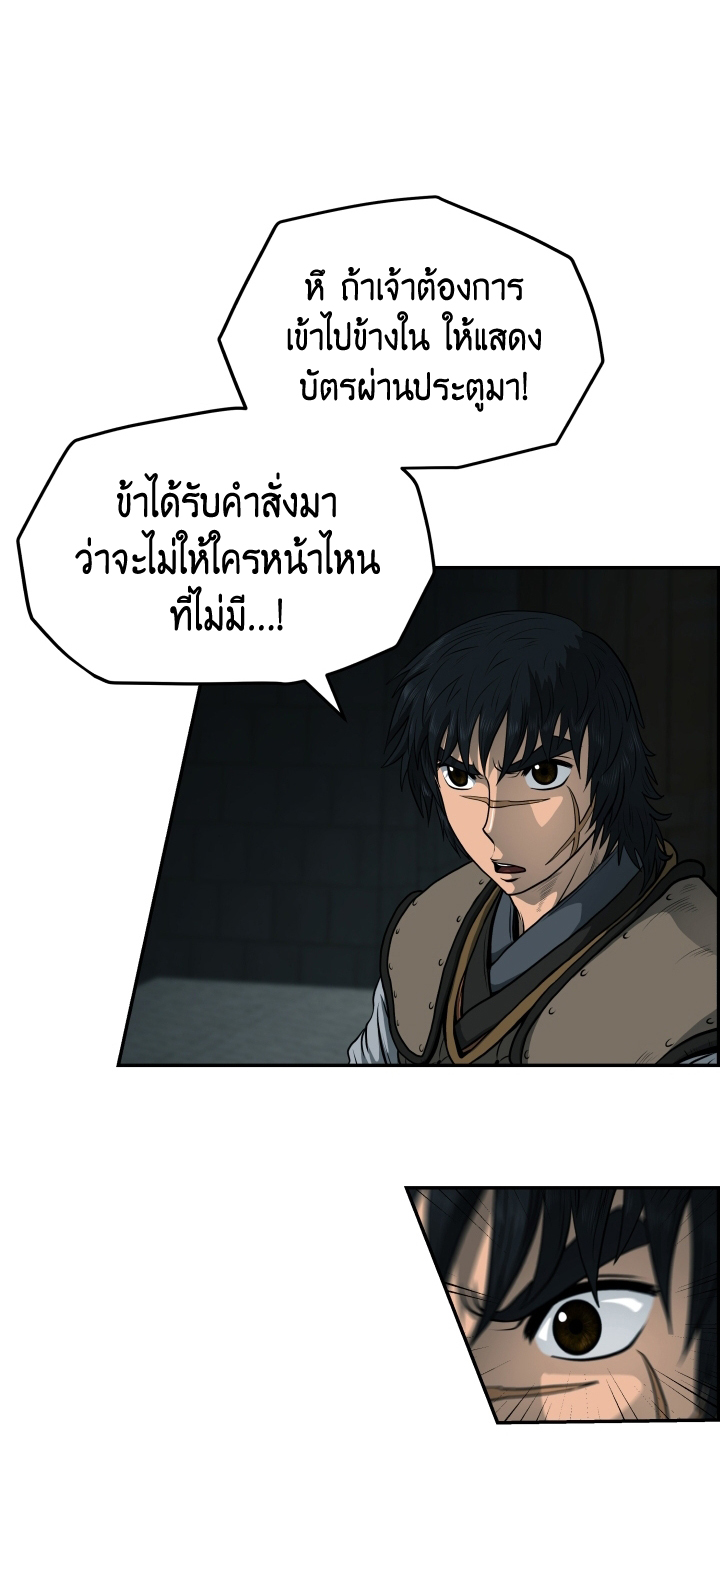 Blade of Wind and Thunder 25 (13)